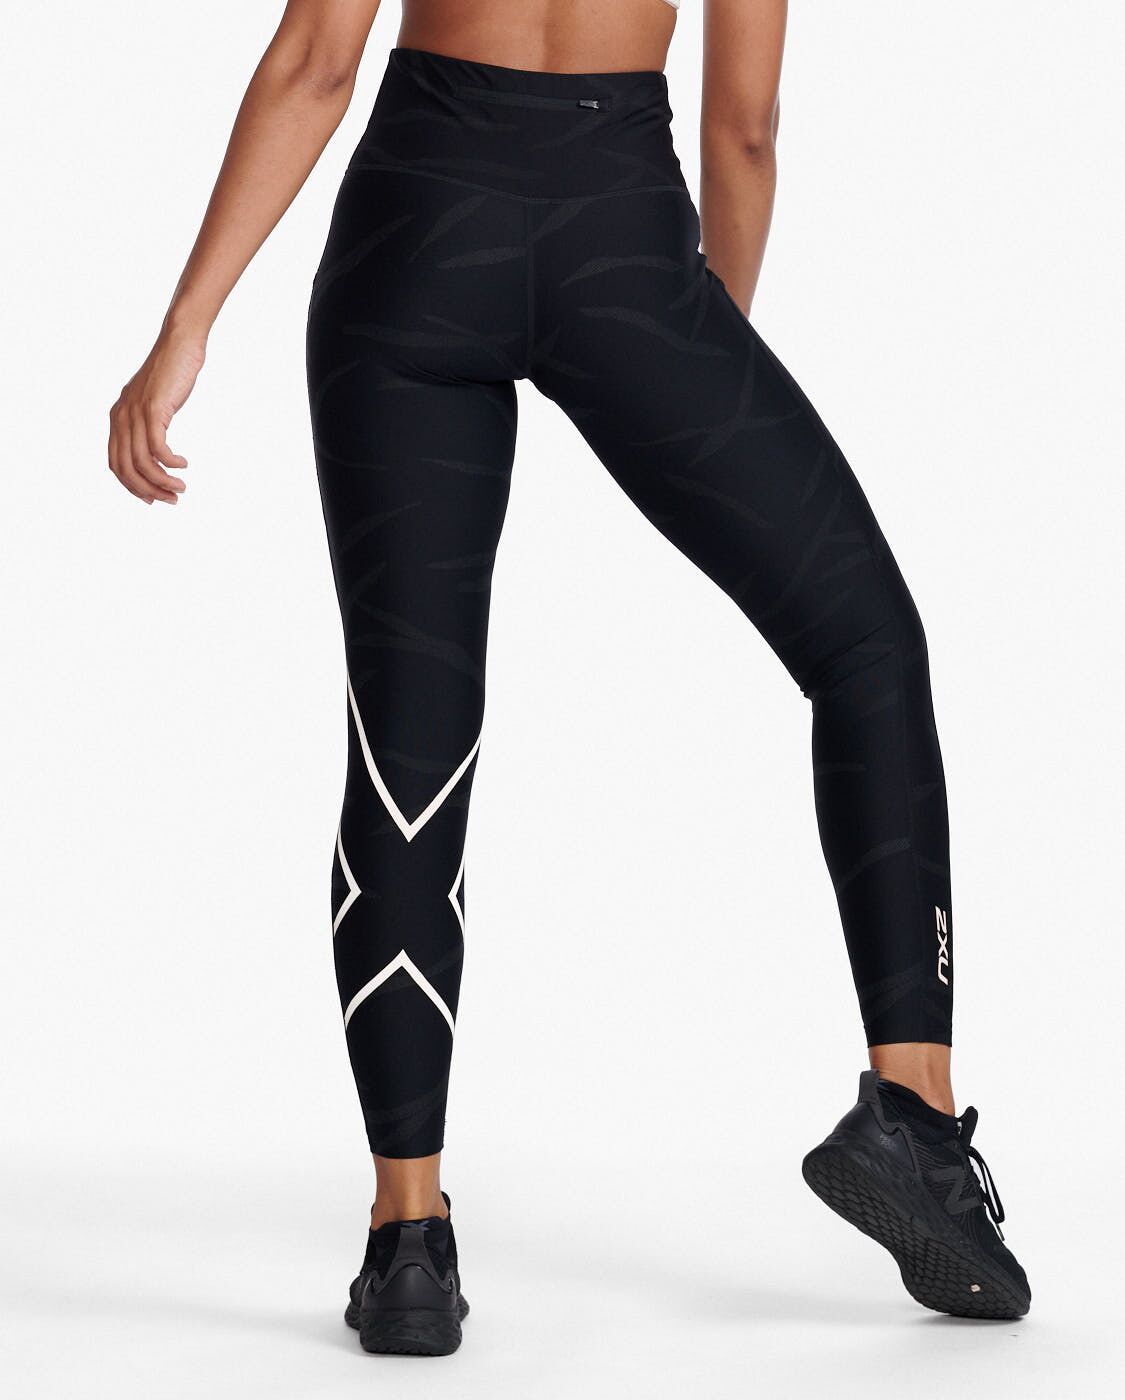 2XU South Africa - Womens Aero Reflect Hi-Rise Compression Tights - Soft Focus/Peach Whip Reflective